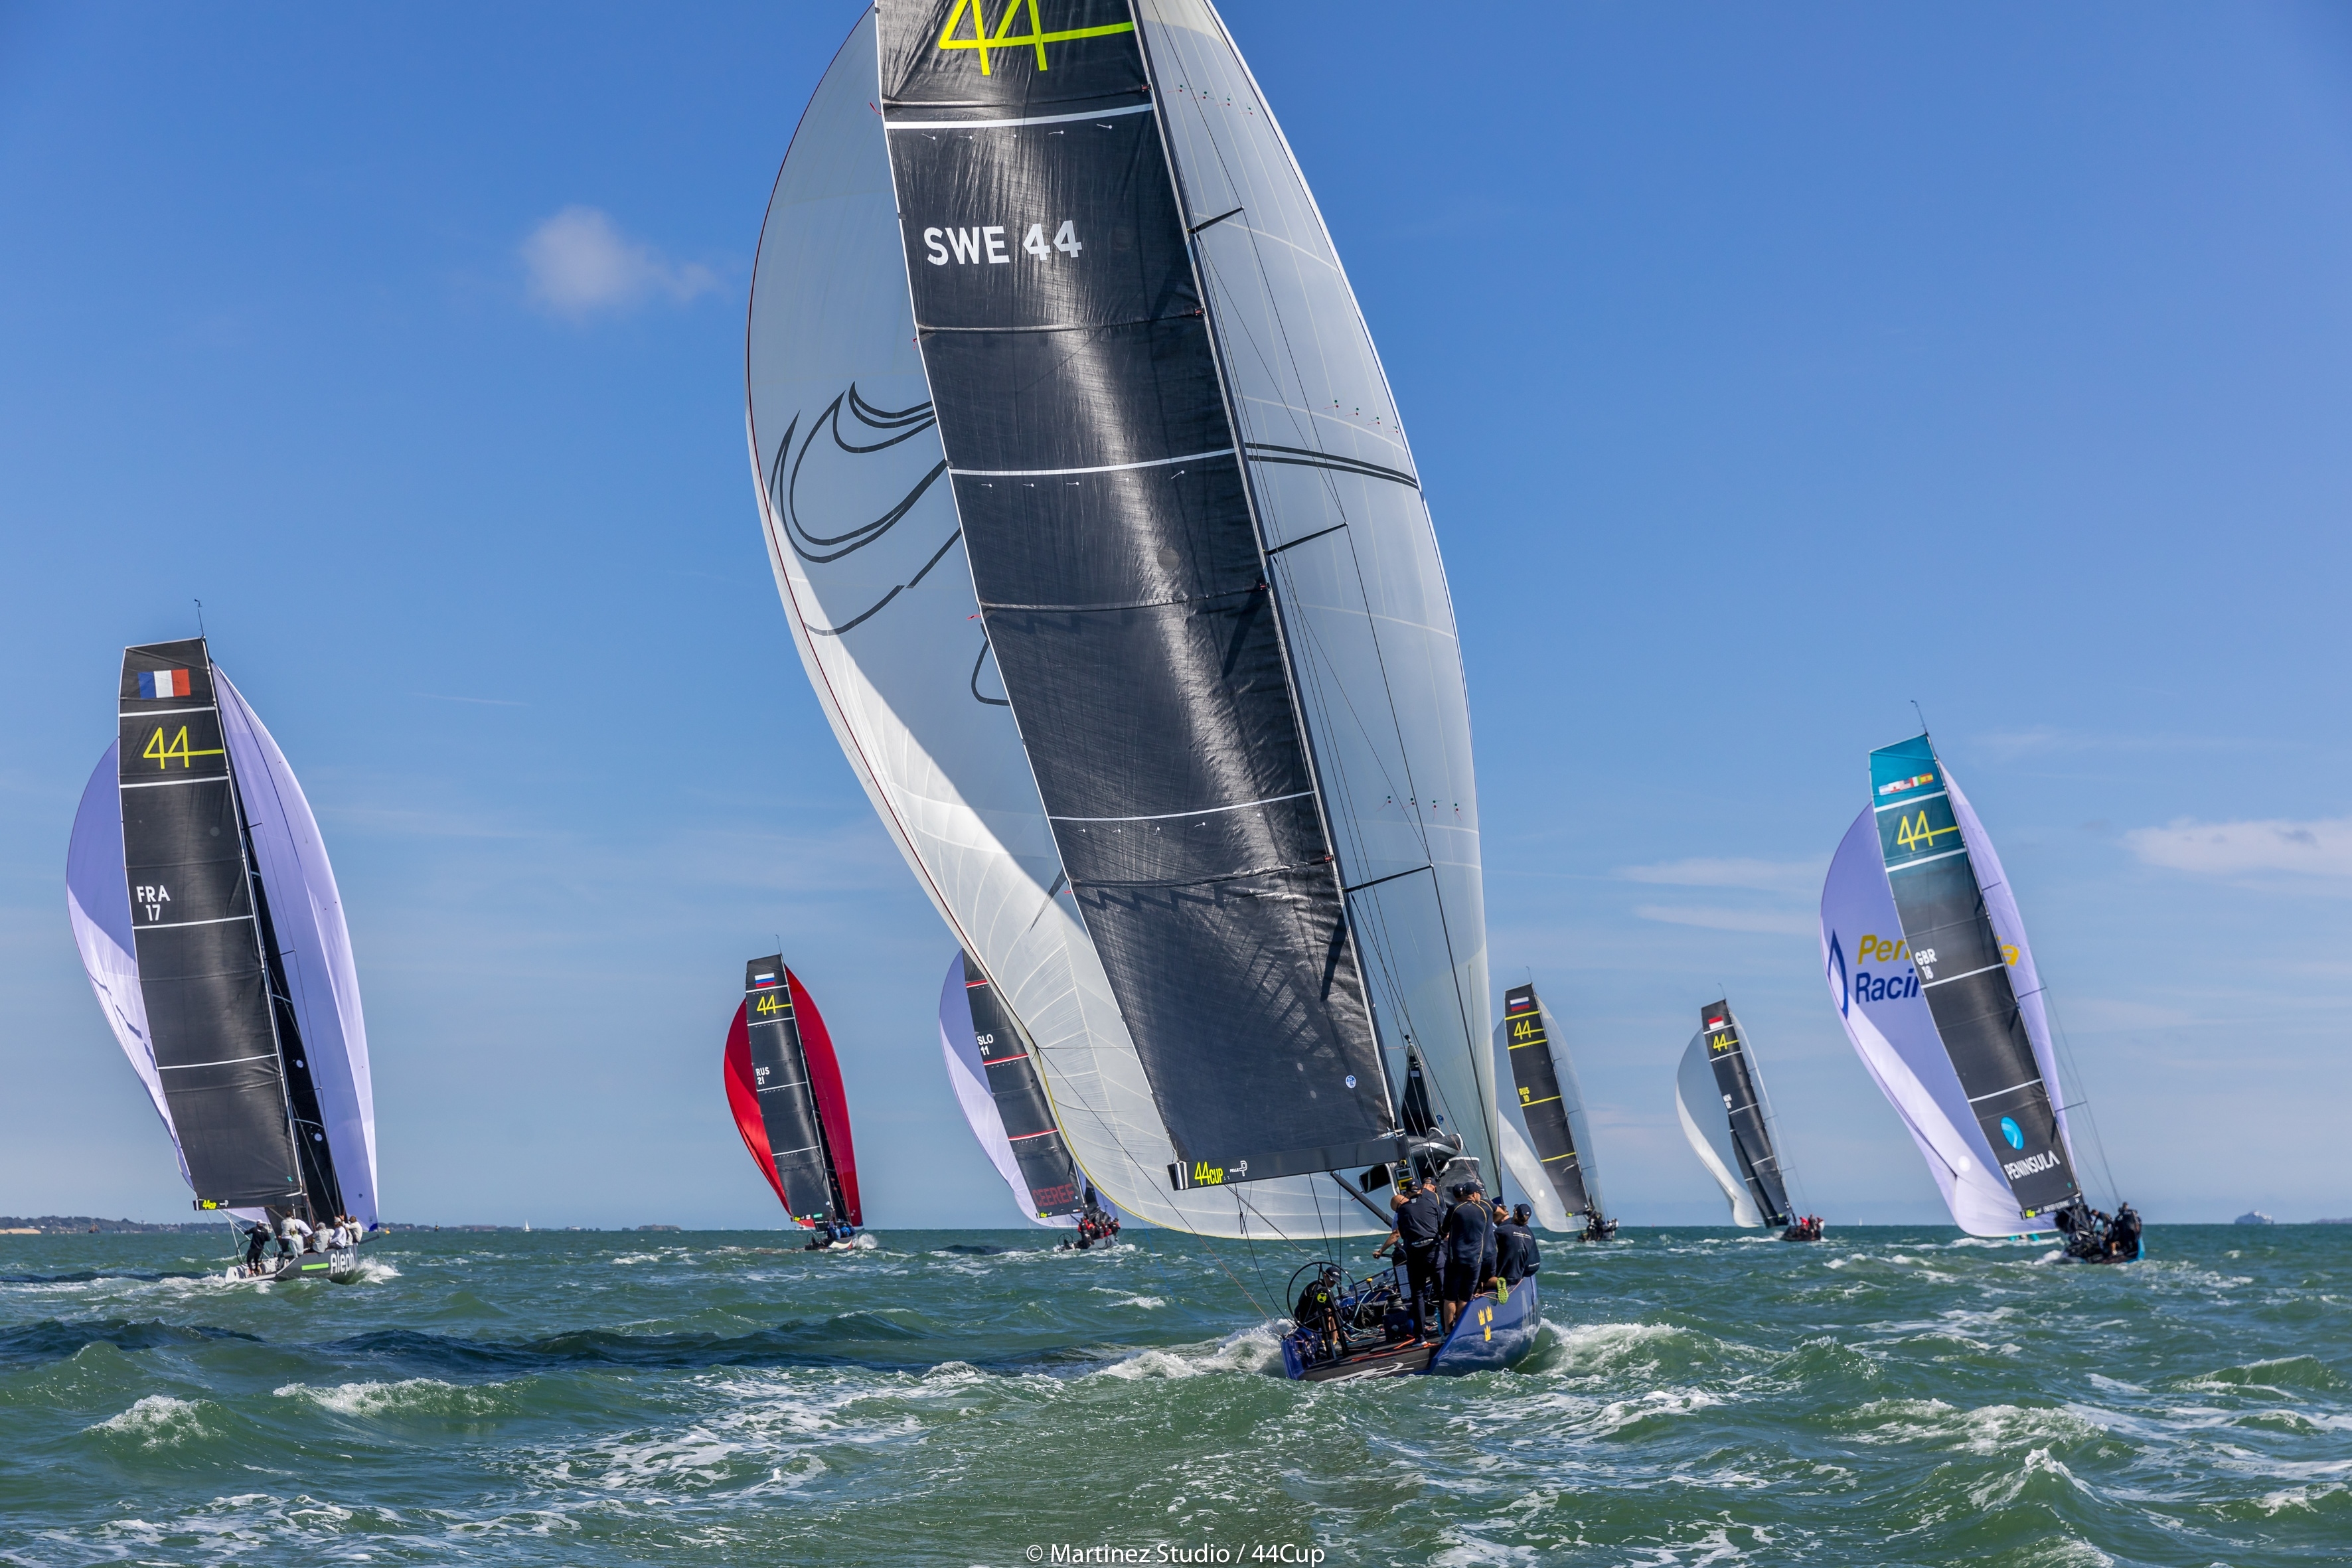  RC44  44Cup  Act 3  Cowes GBR  Final results